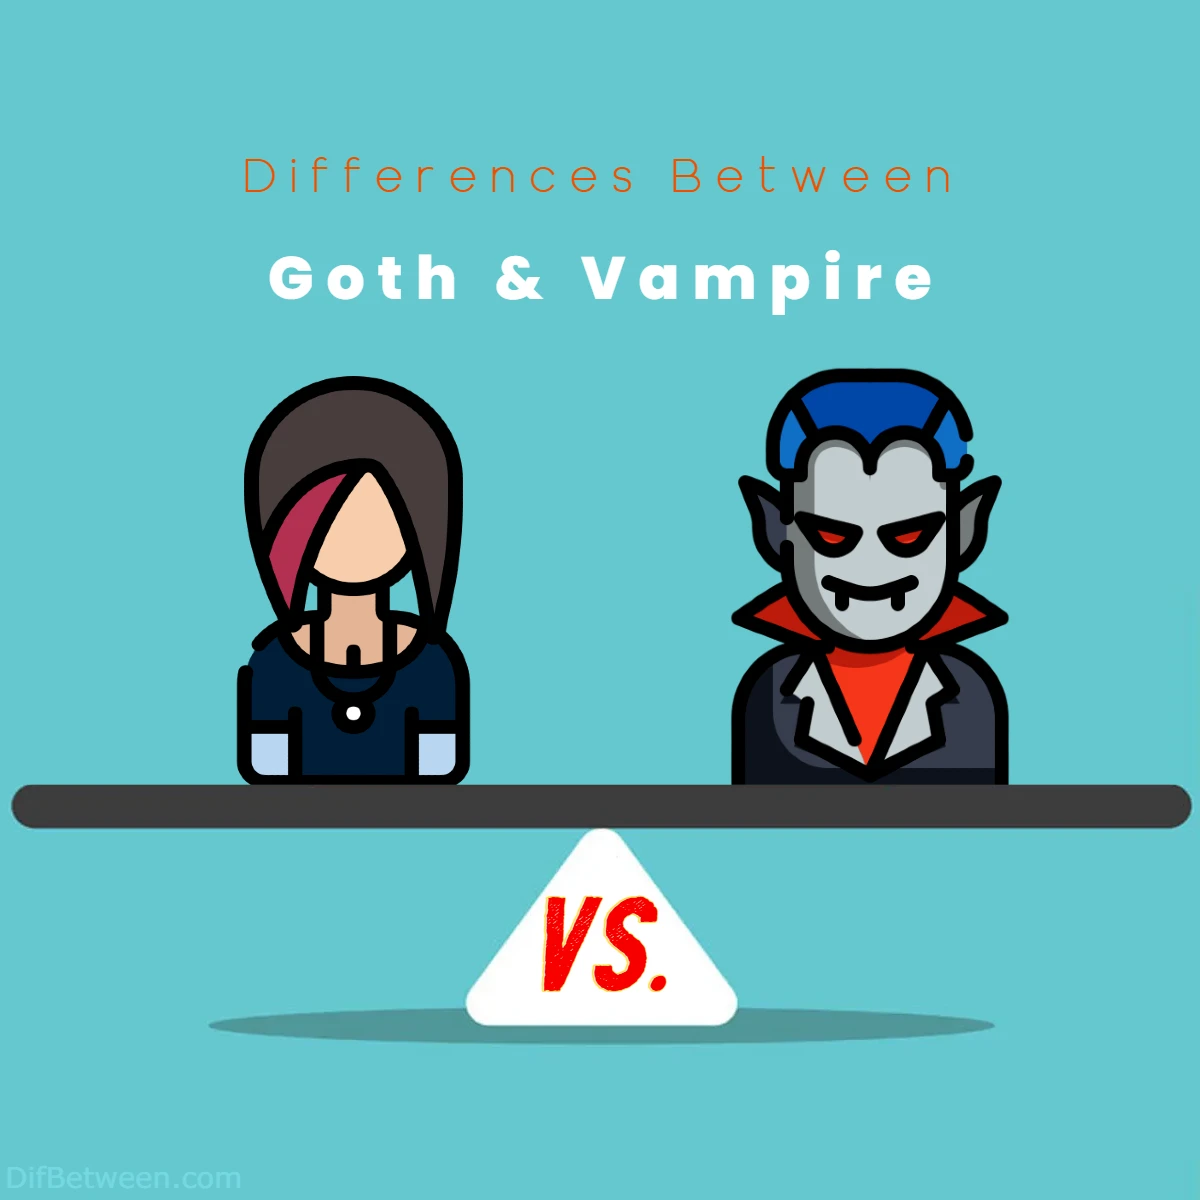 Differences Between Goth vs Vampire